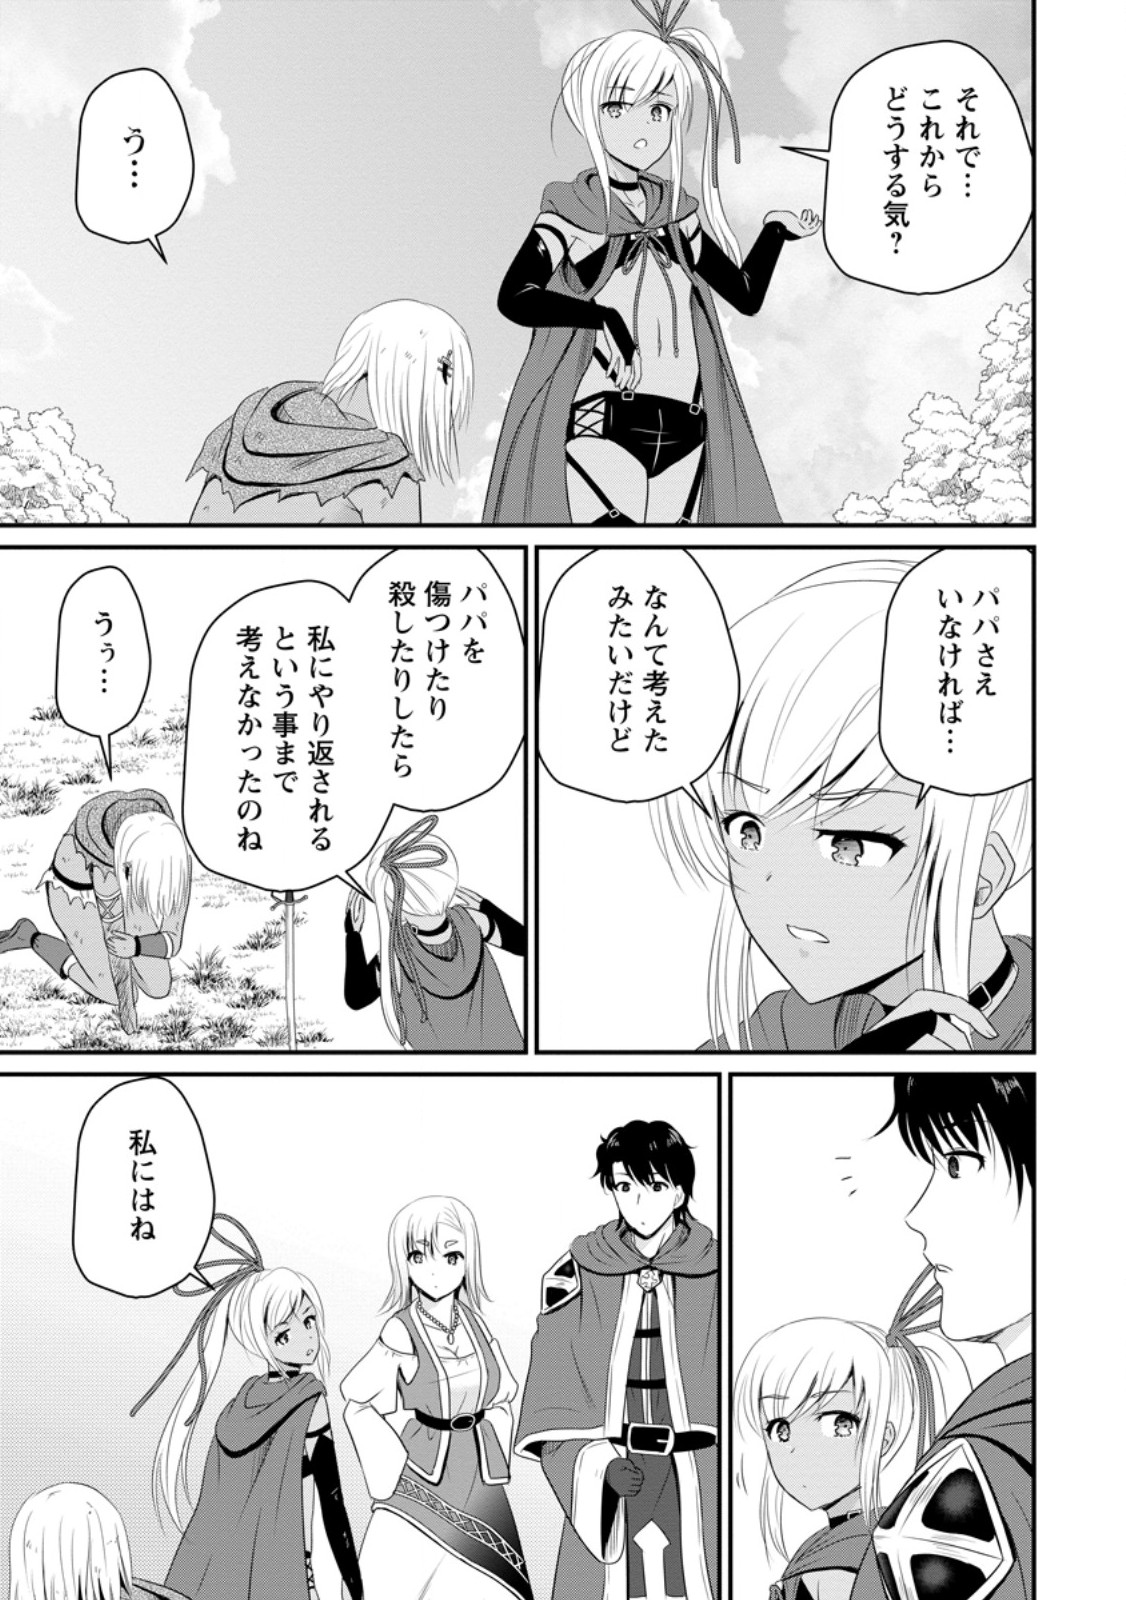 The Frontier Life of The Low-Class Ossan Healer And The Lovery Girl - Chapter 47.1 - Page 3